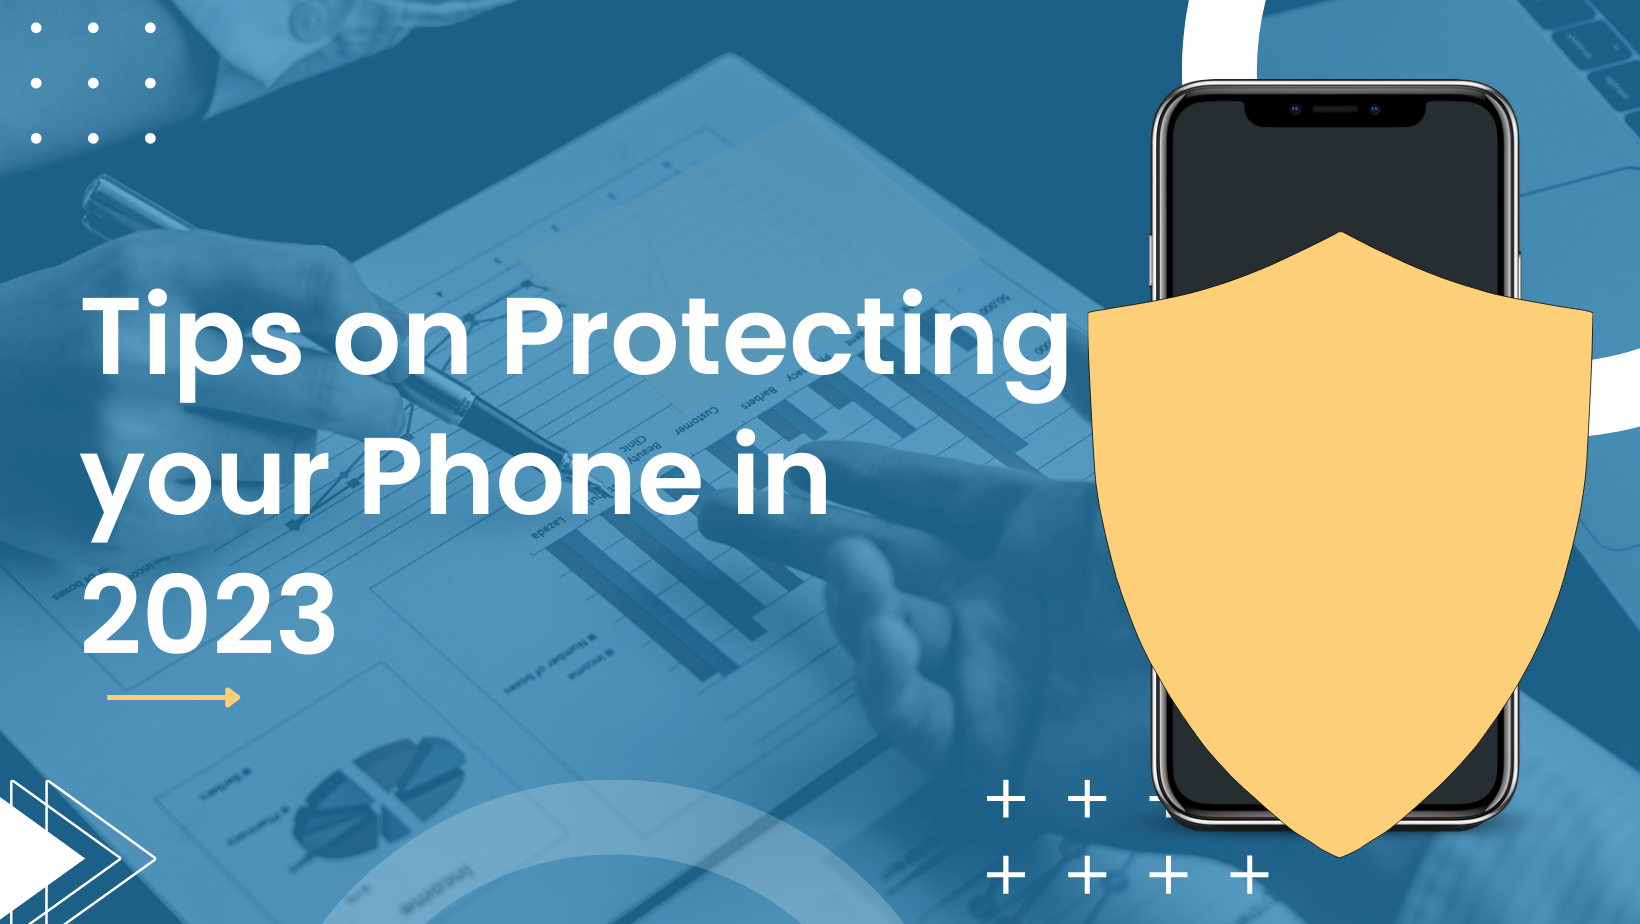 “Protect Your Phone in 2023: Tips for Keeping Your Smartphone Safe & Secure”